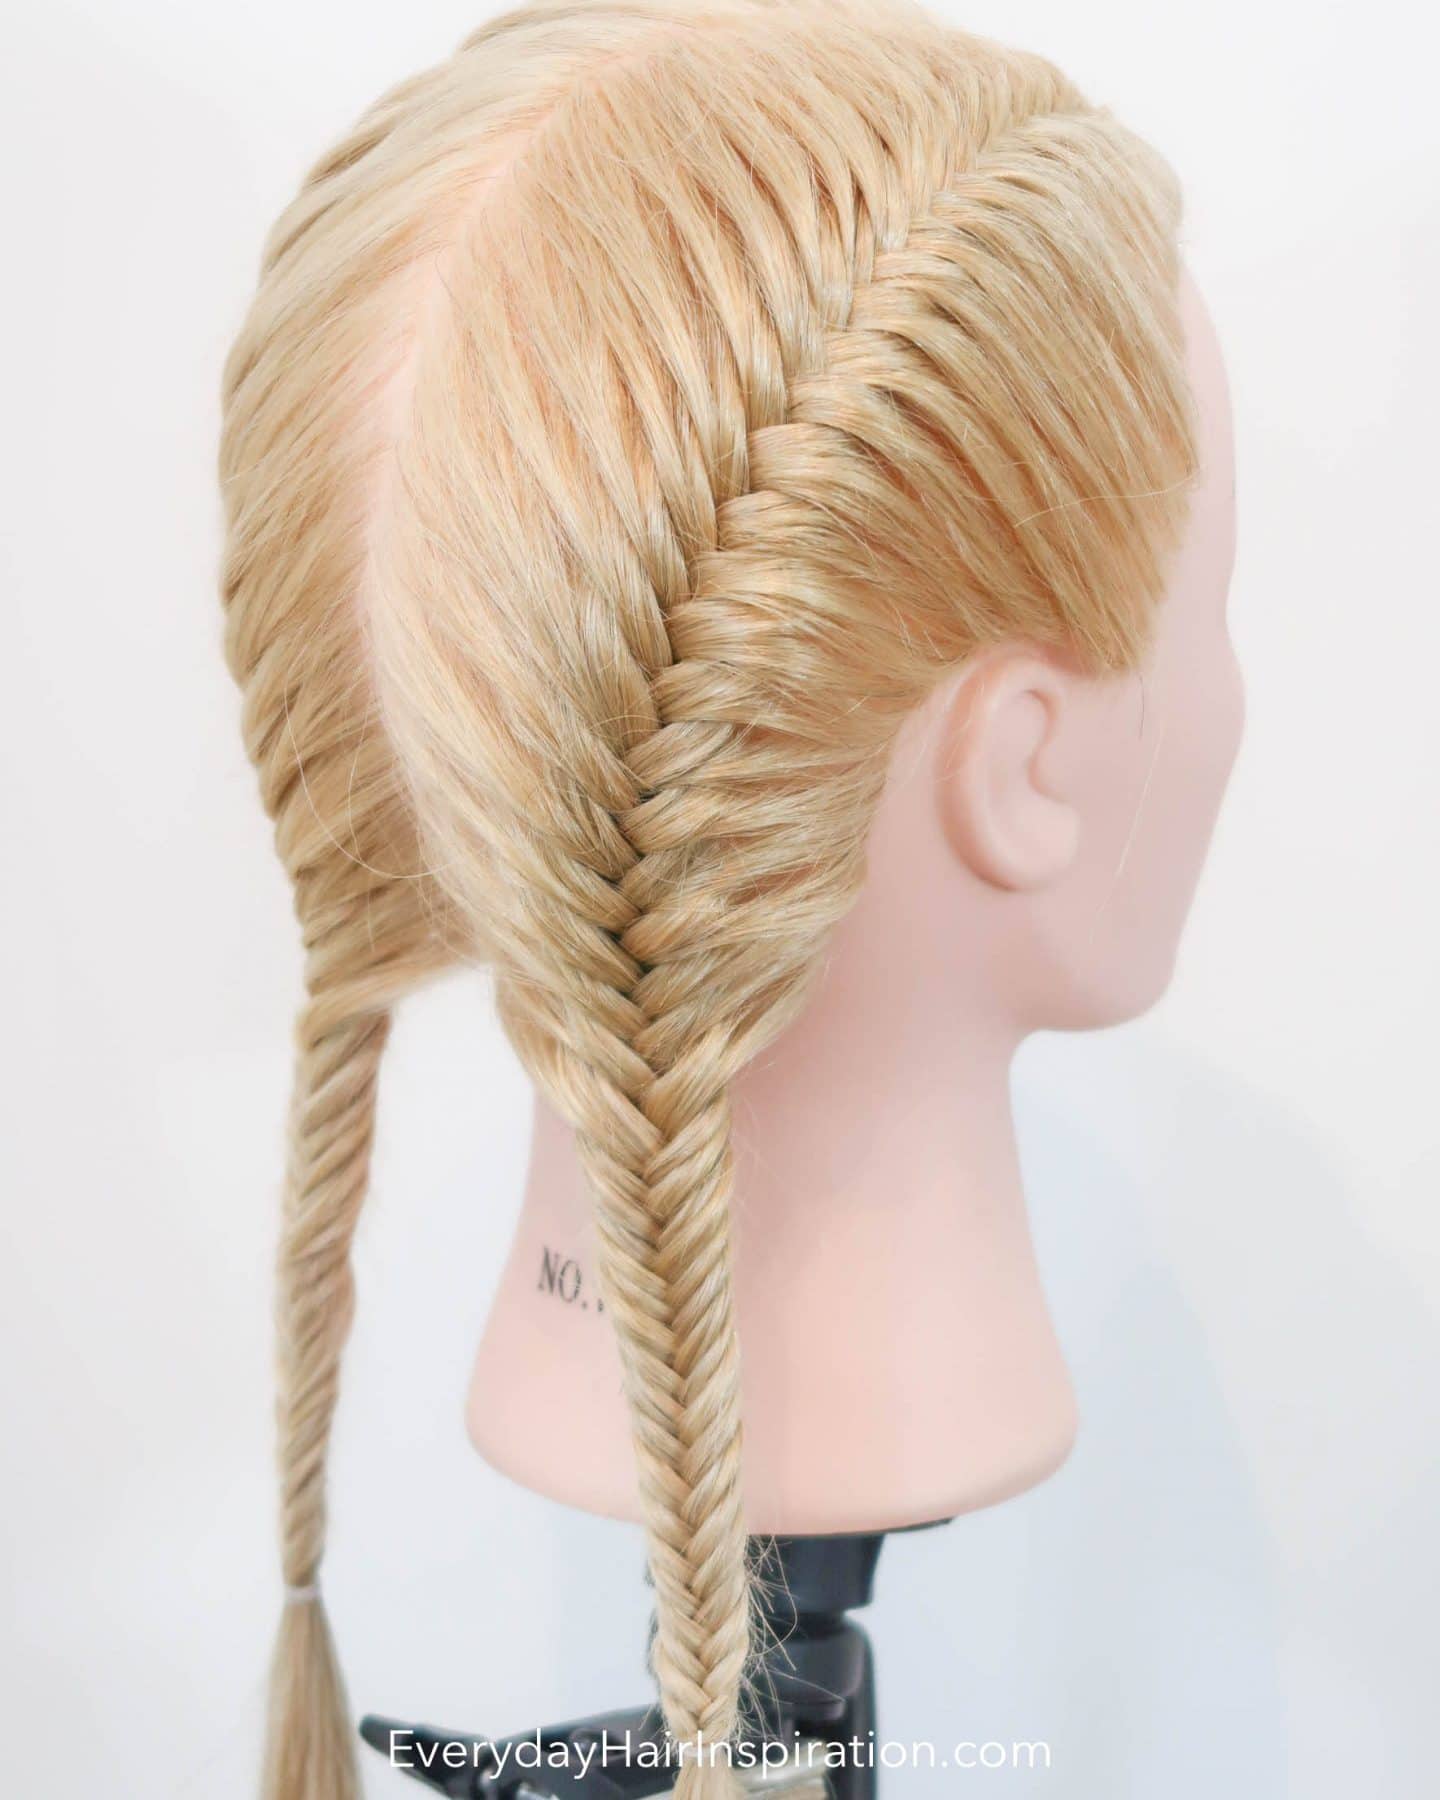 Double French Fishtail Braid Step By Step Guide - Everyday Hair inspiration